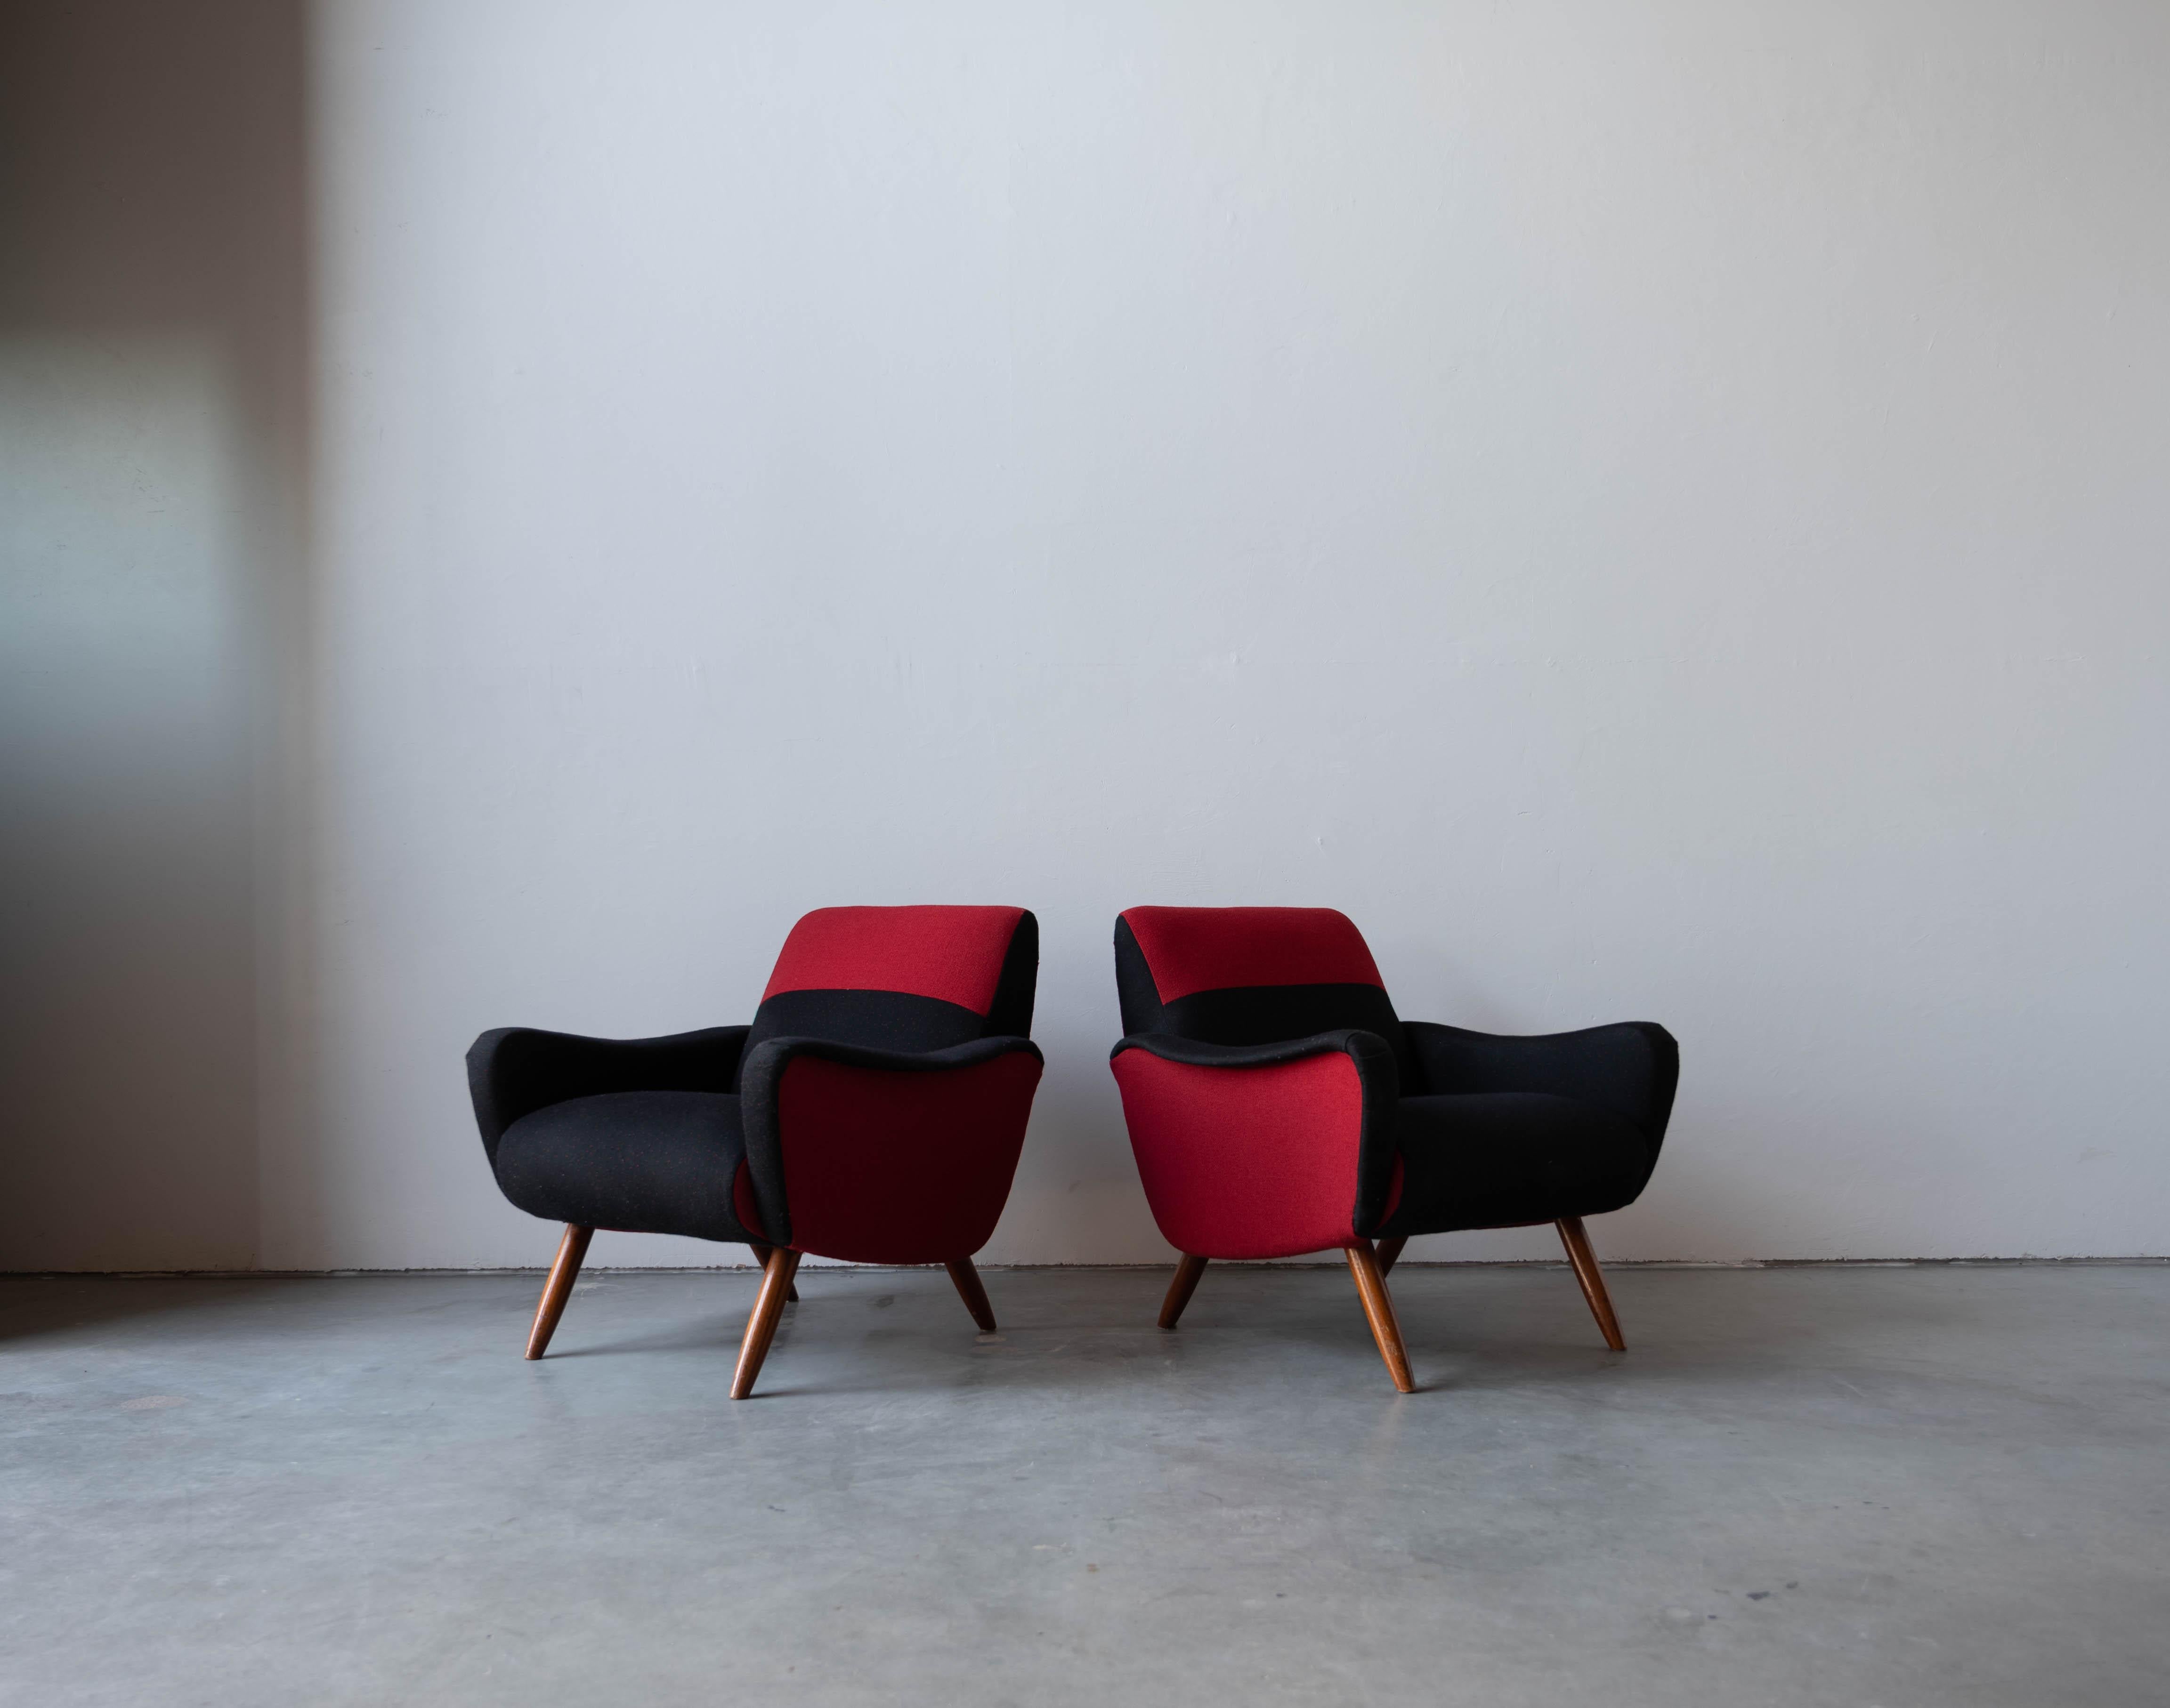 A pair of lounge chairs / armchairs, designed by Kurt Hvitsjö for Isku, Finland, 1950s.

Features an overstuffed wooden structure on finely turned wooden legs. 

Other designers of the period include Gio Ponti, Alvar Aalto, Carlo Mollino, Carlo